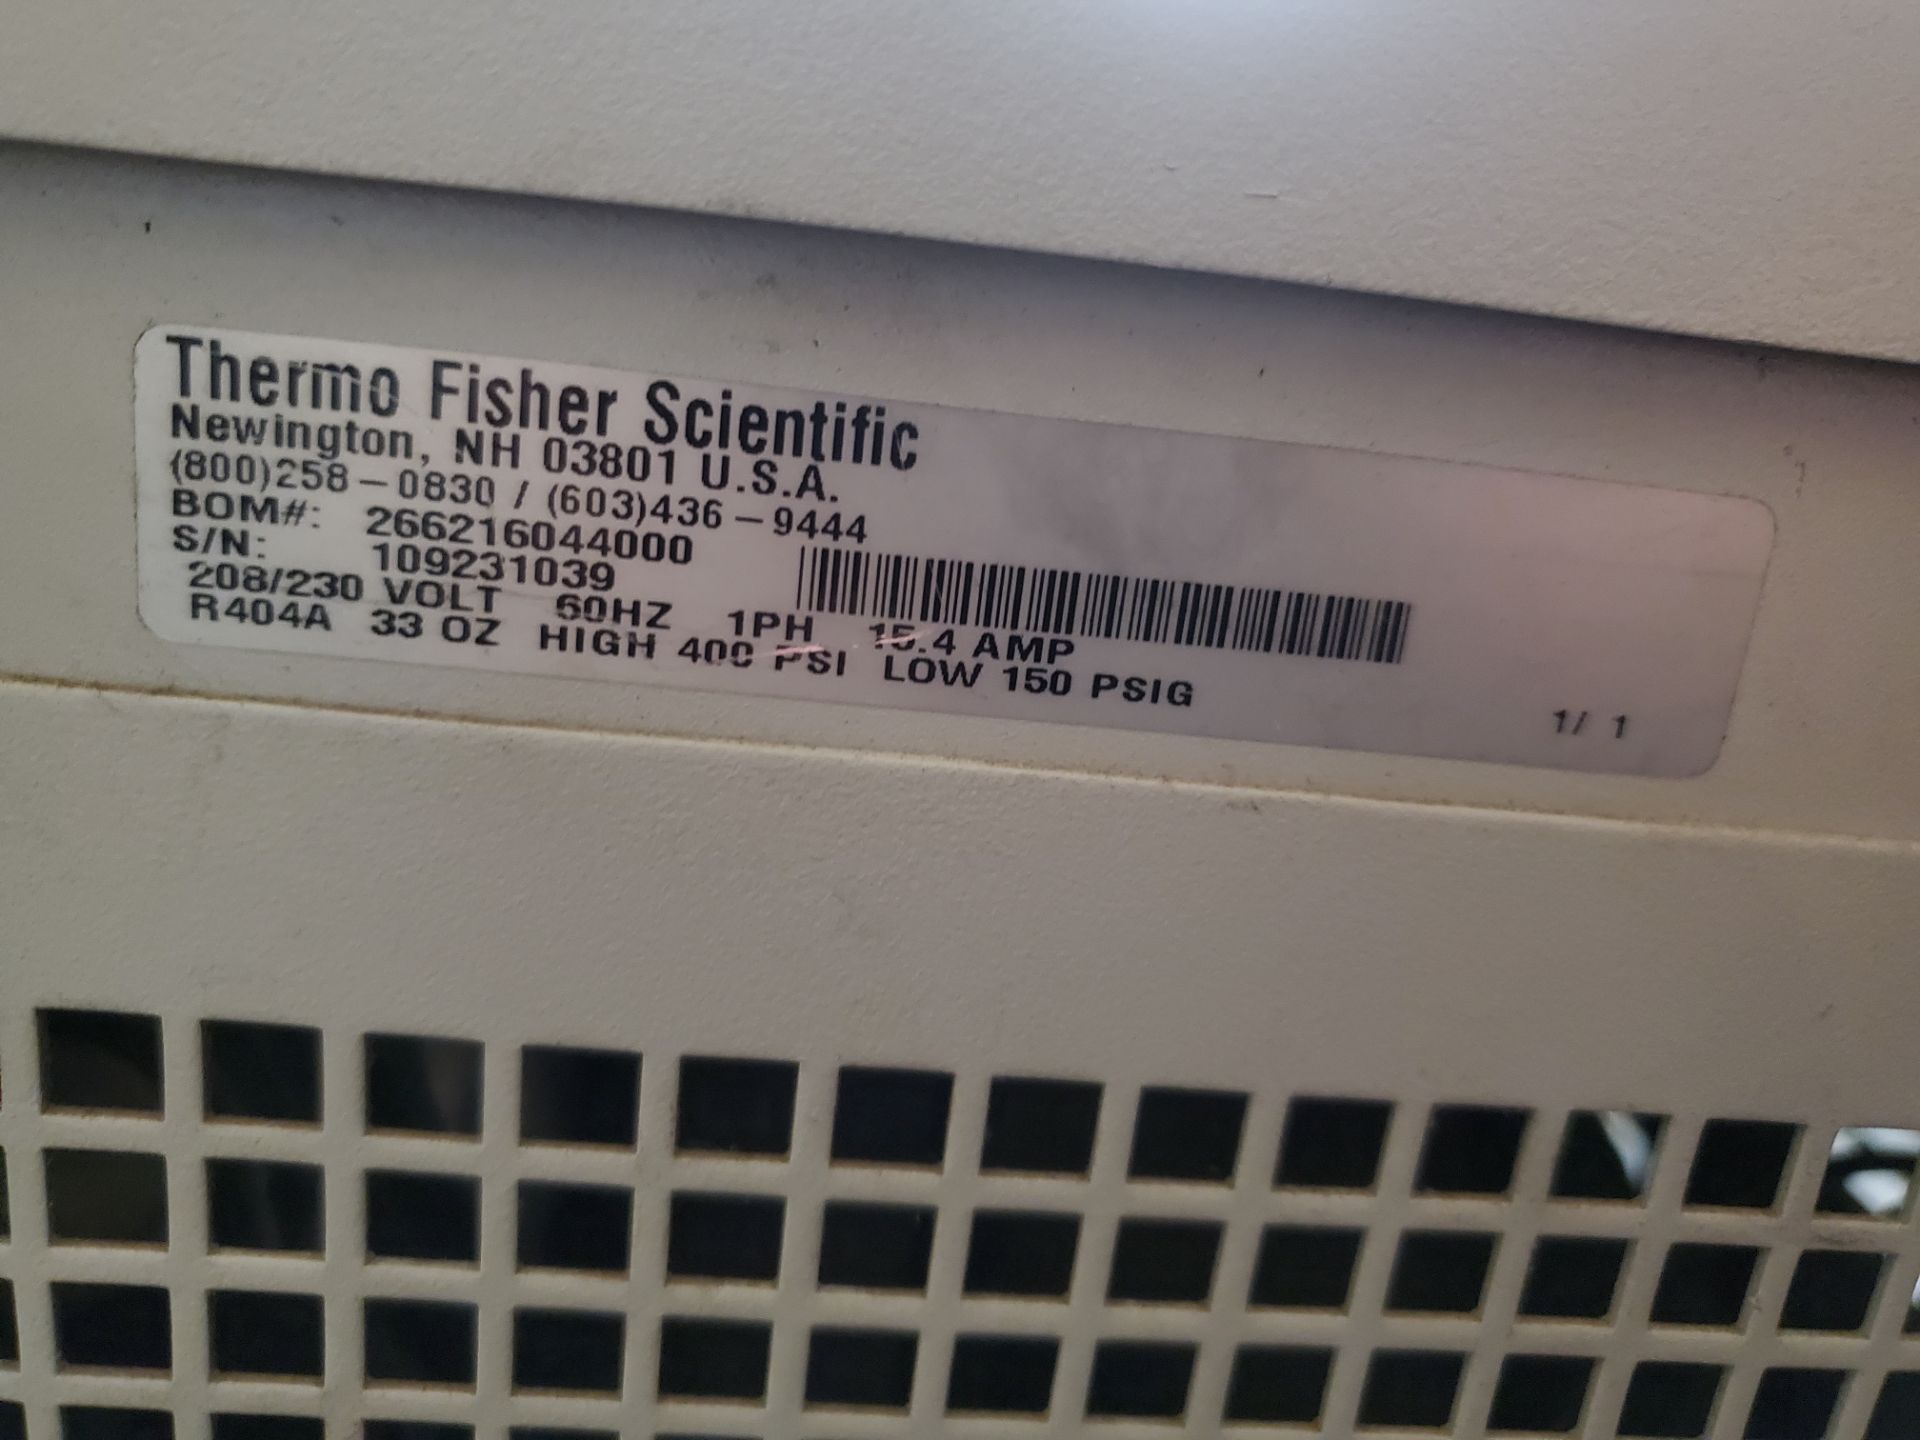 Used Thermo Fisher Scientific Recirculating Chiller. Model Merlin M150 - Image 2 of 2